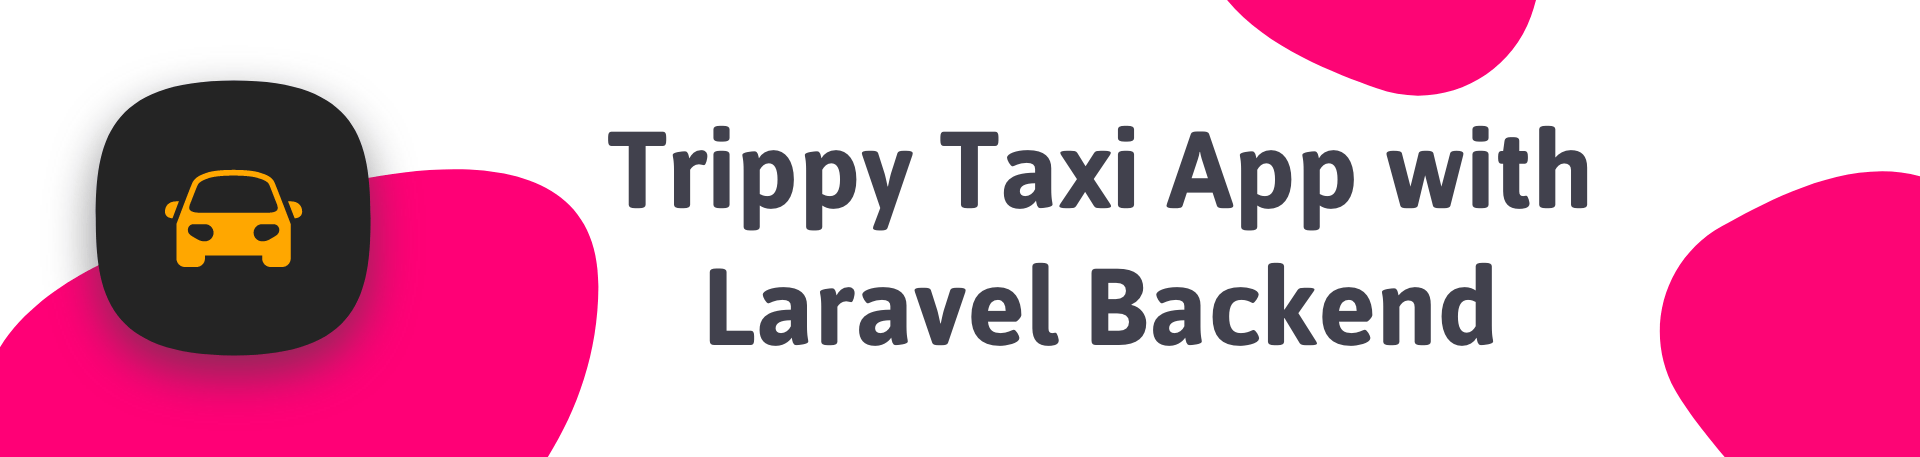 Trippy Taxi React Native Complete Taxi App with Laravel Backend - 1